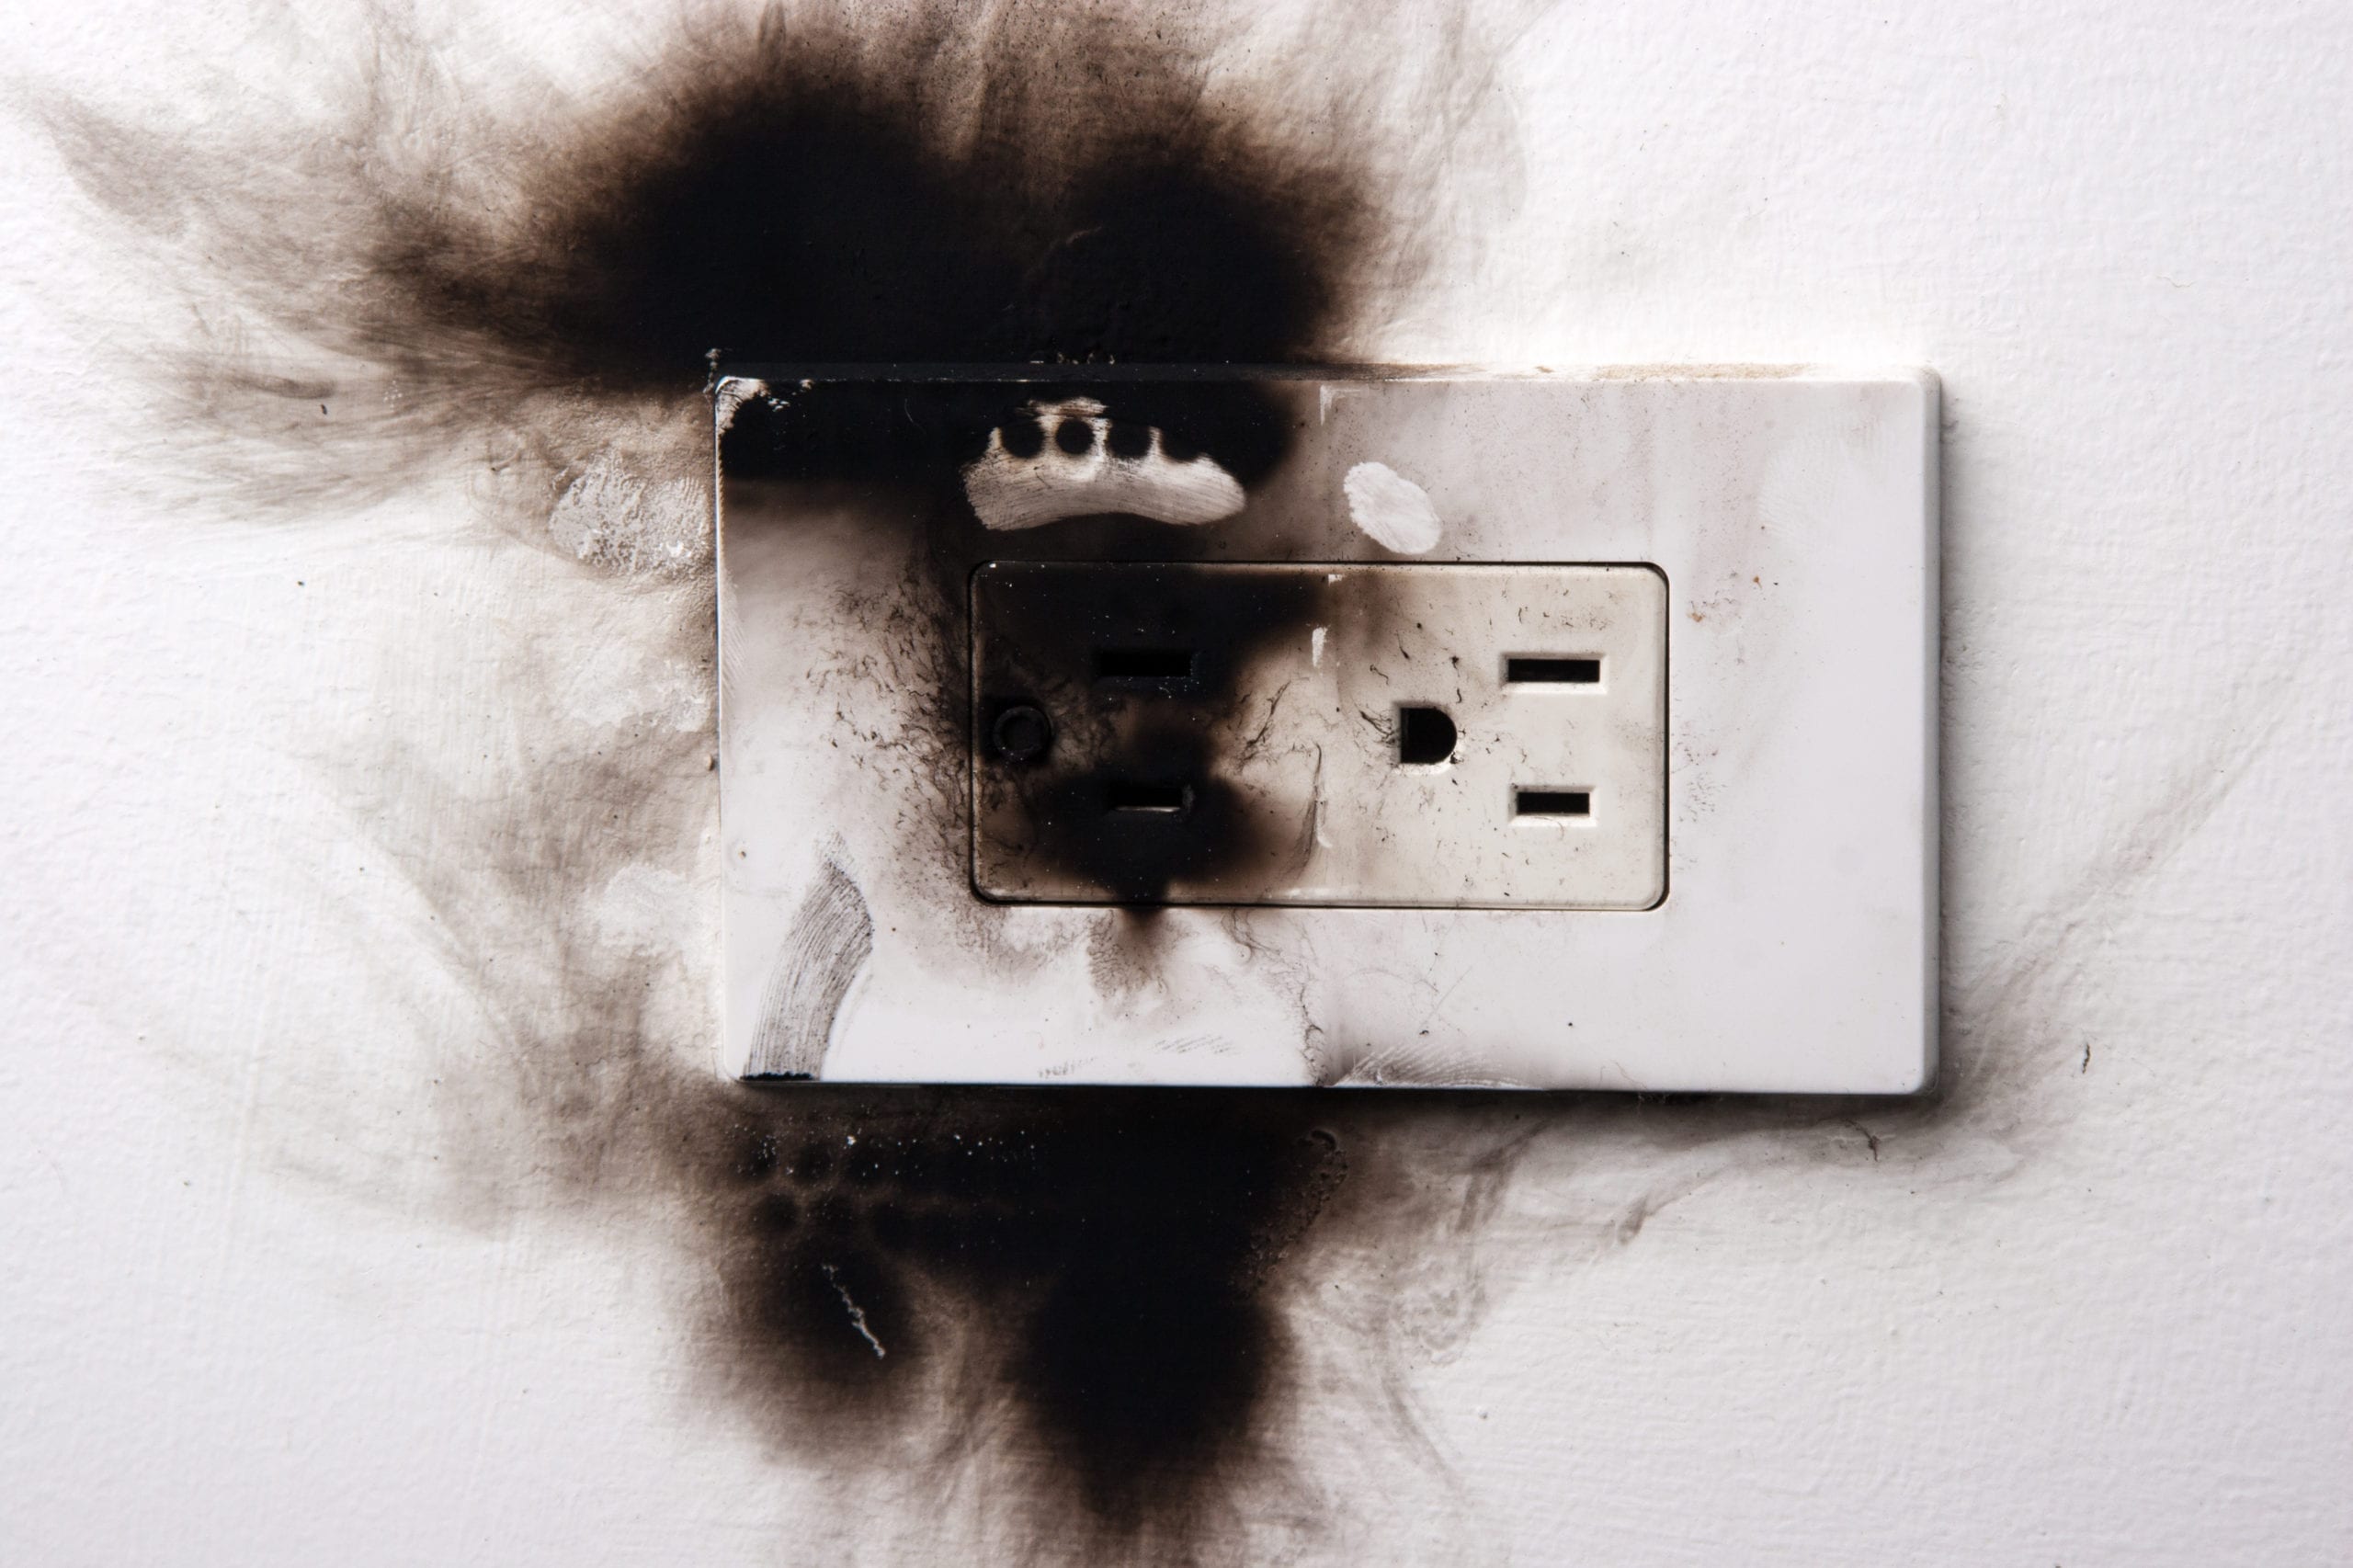 home electrical fire hazards